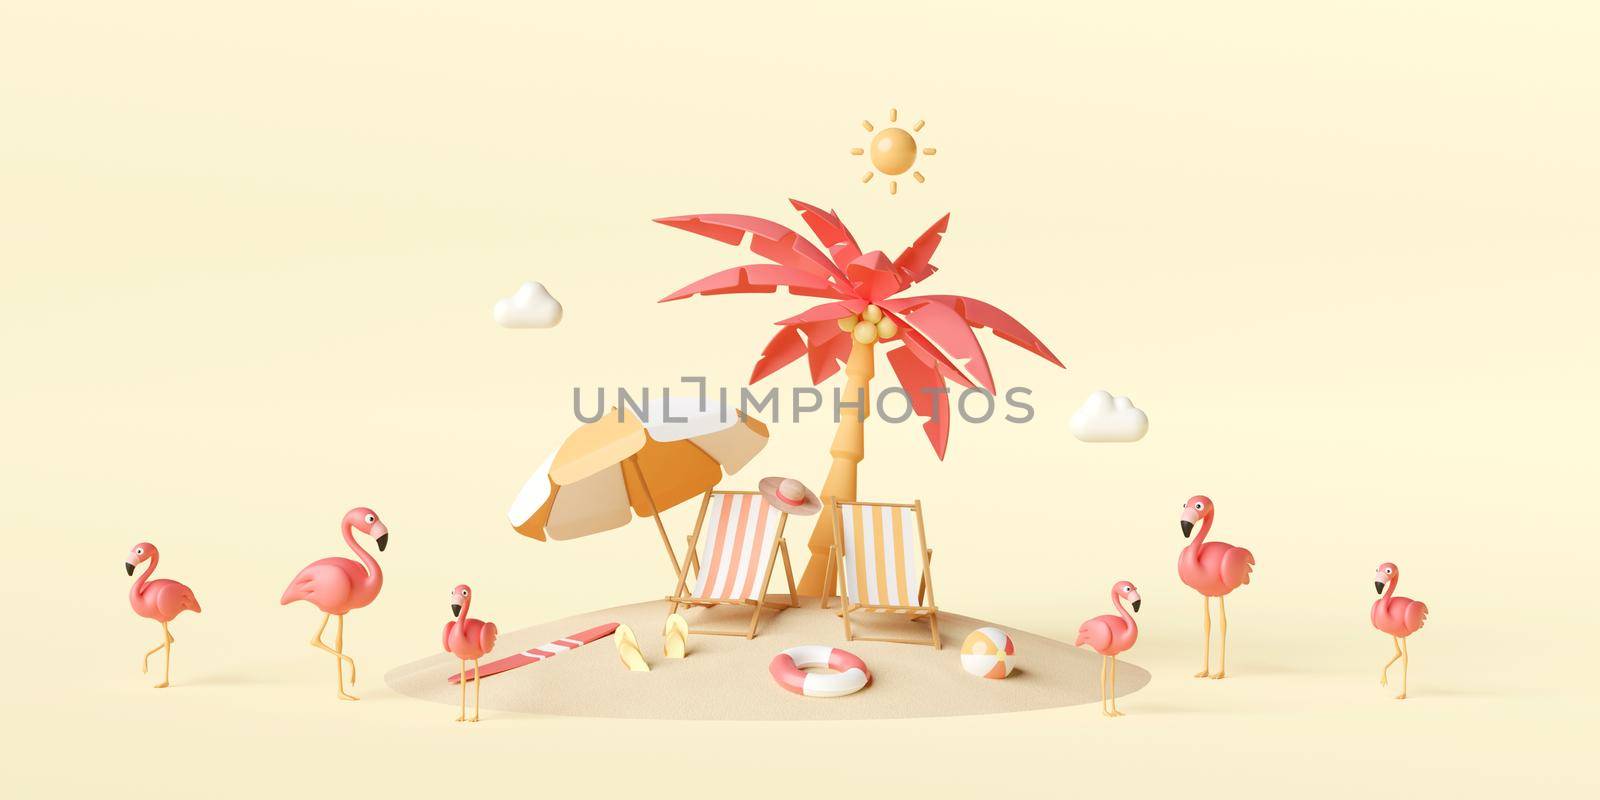 Summer vacation concept, Famingo and beach accessories under palm tree on the beach, 3d illustration by nutzchotwarut